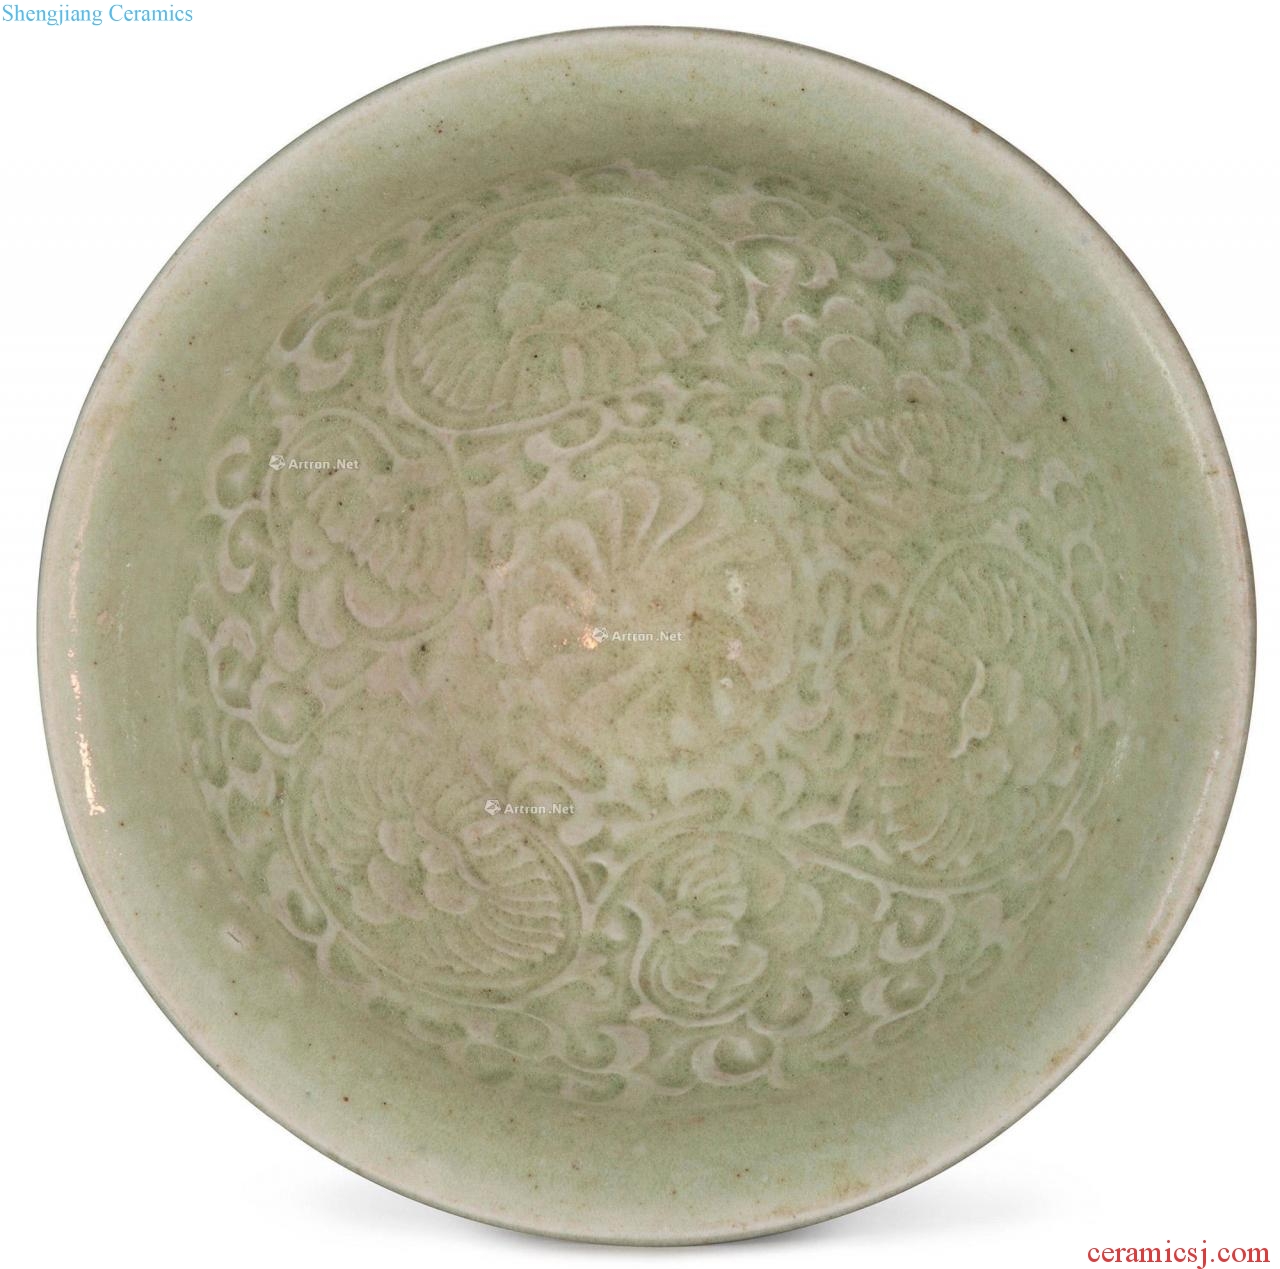 Northern song dynasty/gold Yao state kiln green glaze stamps wen dai li type small 盌 flowers